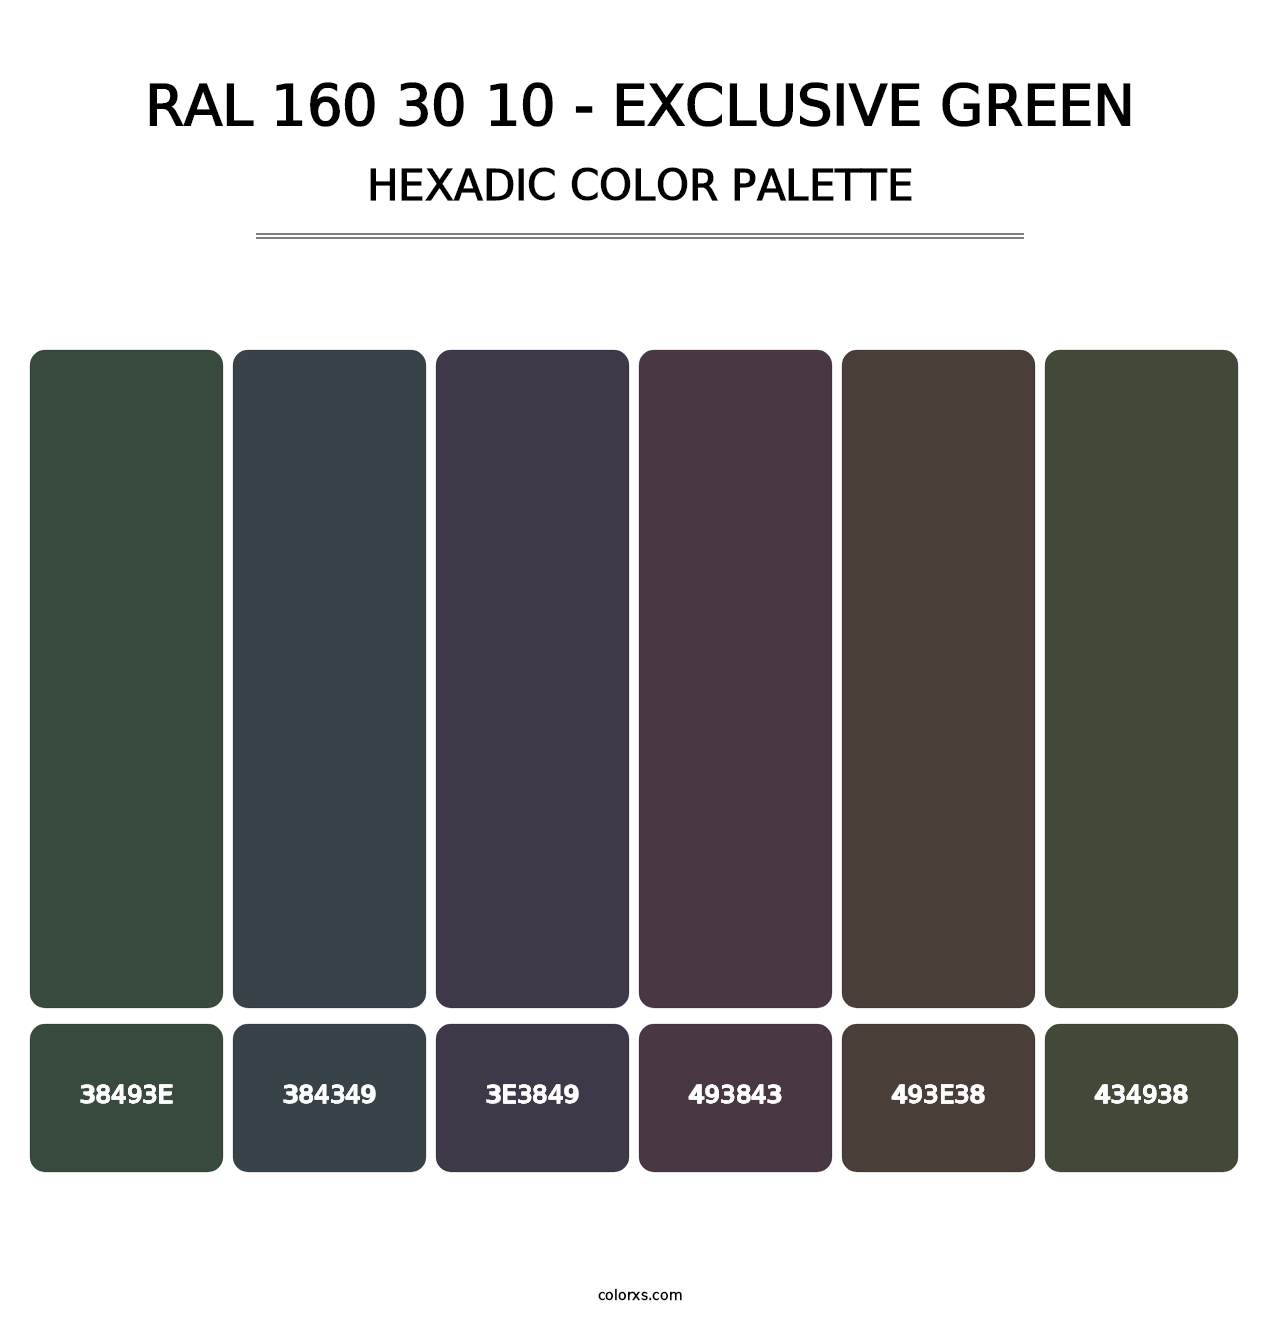 RAL 160 30 10 - Exclusive Green - Hexadic Color Palette